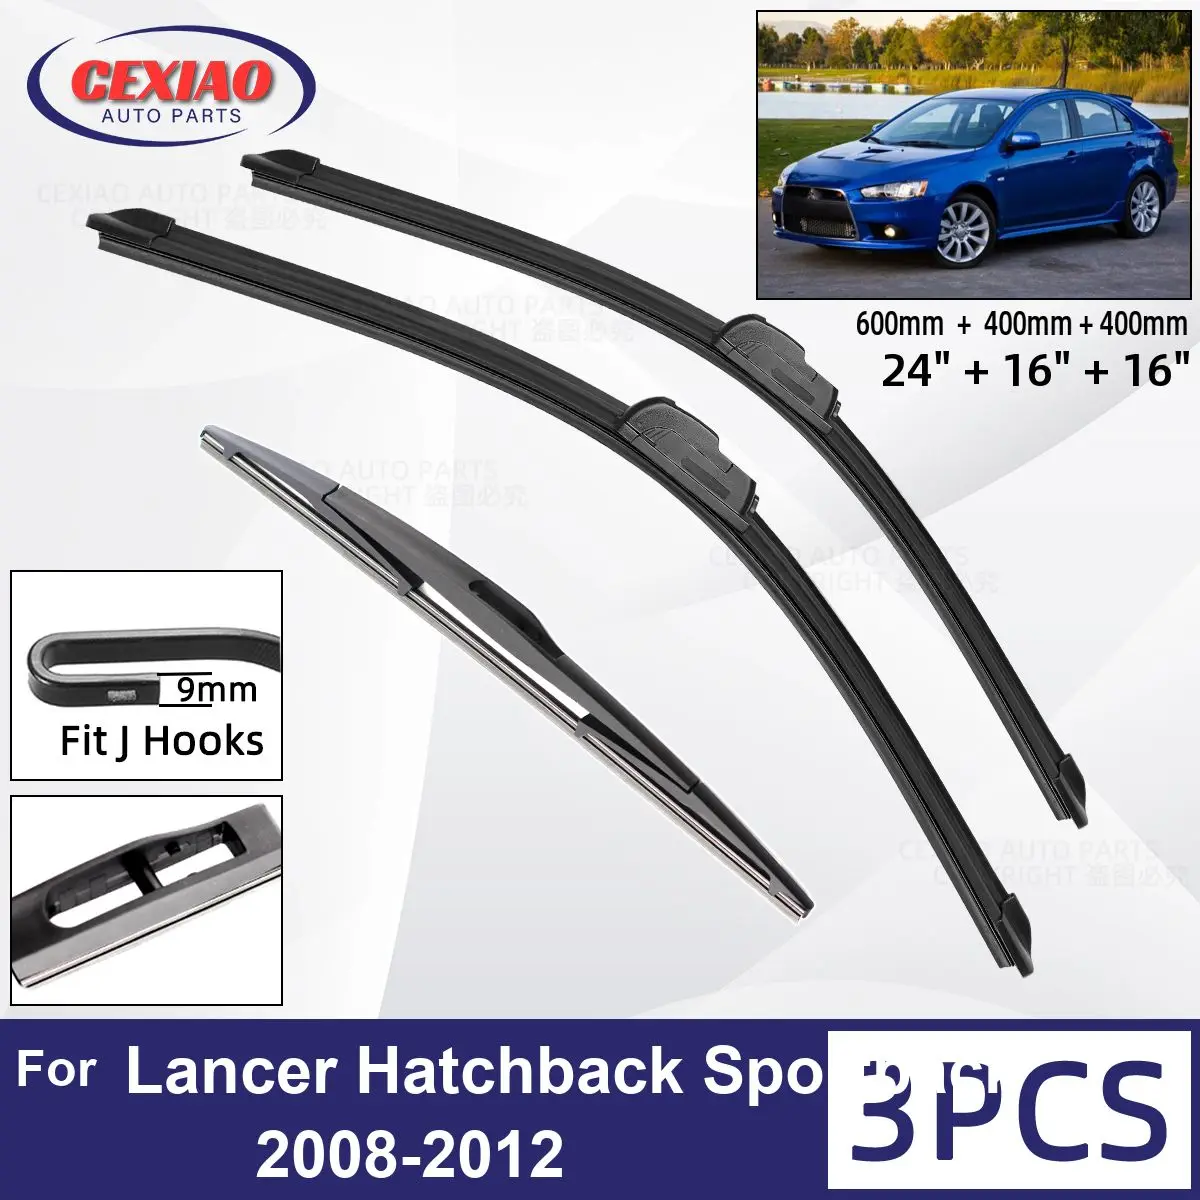 

For Mitsubishi Lancer Hatchback Sportback 2008 - 2012 Car Front Rear Wiper Blades Windscreen Wipers Auto Windshield 24"+16"+16"